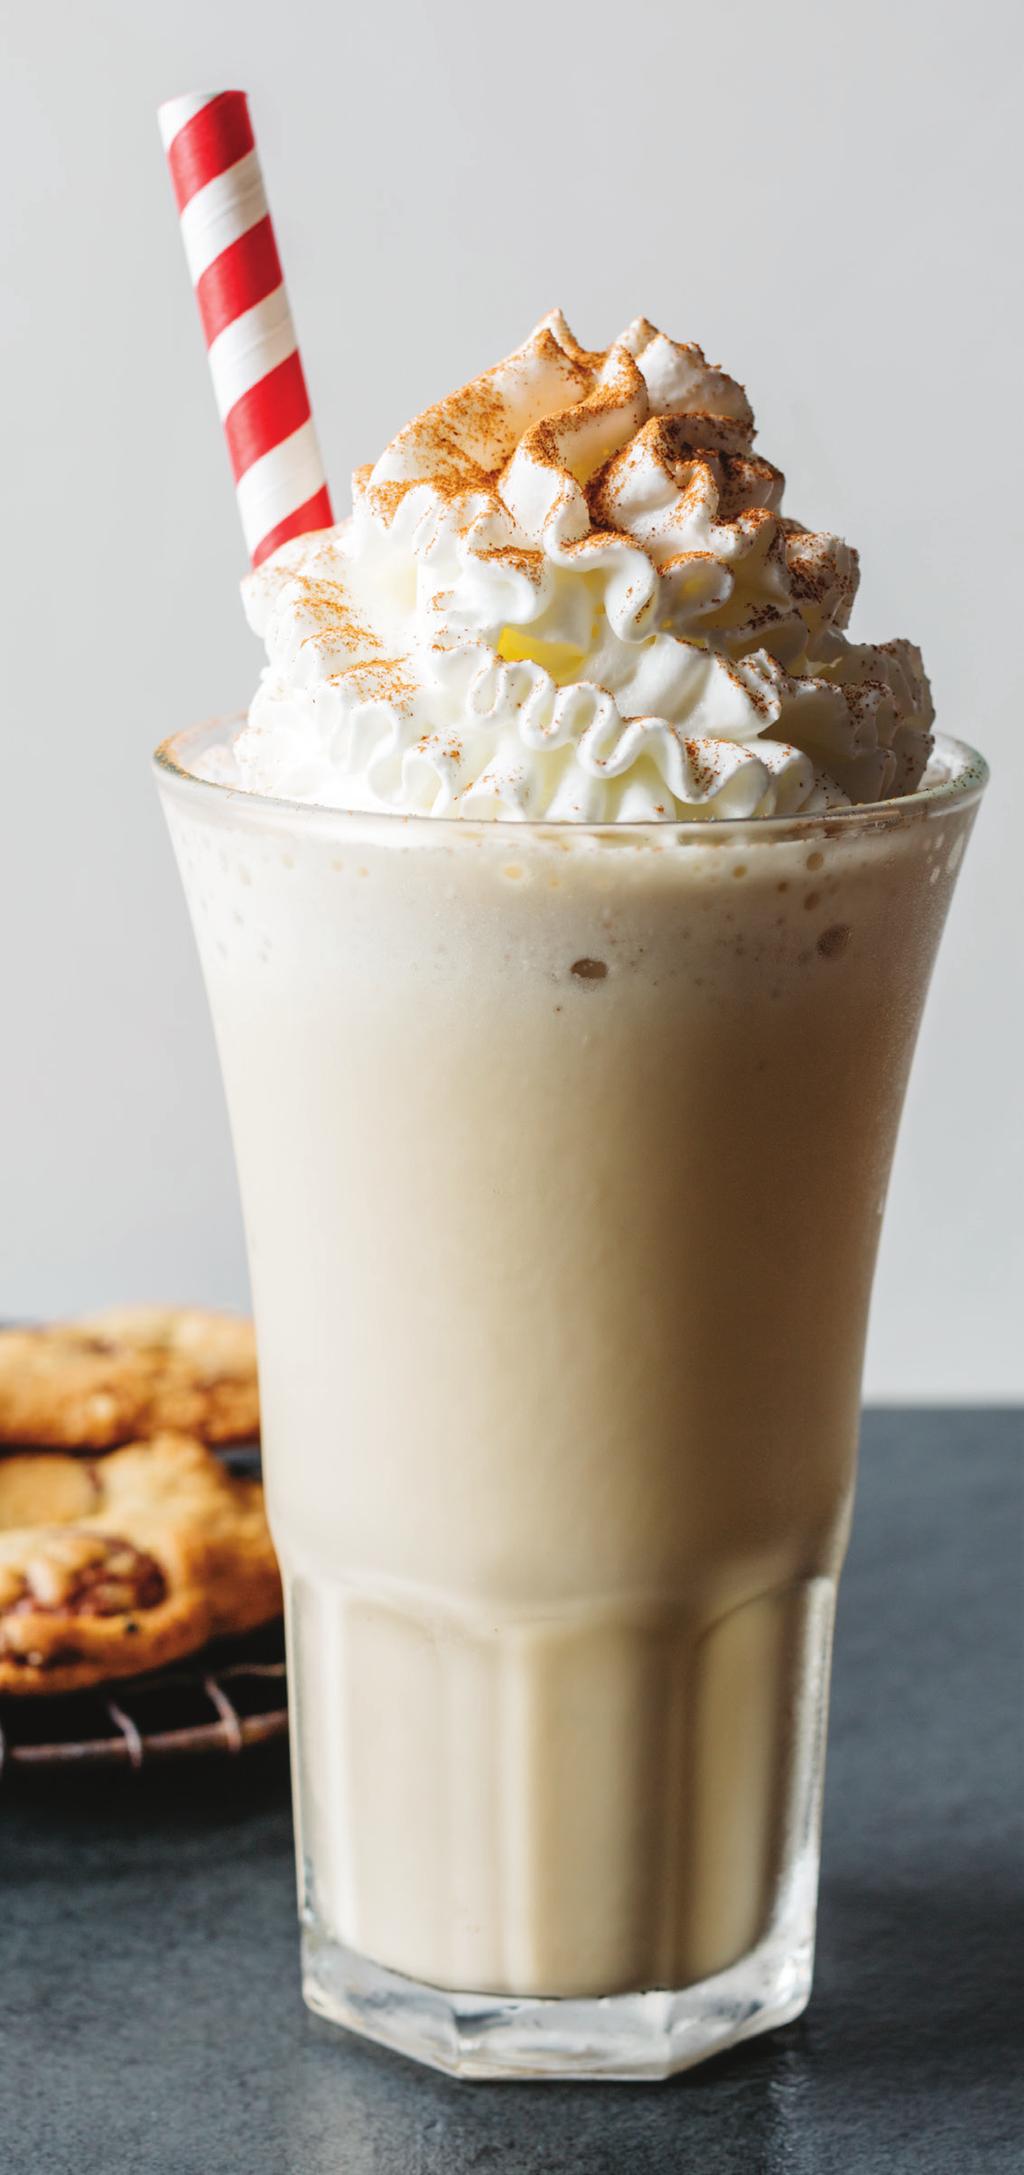 Sweet Sofiaccino Coco-Mocho Crunch Ninjaccino ground Colombian coffee 3 cups ice 4 cup evaporated milk 2 cup sweetened condensed milk 3 cups ice Whipped cream, for garnish Ground cinnamon, for